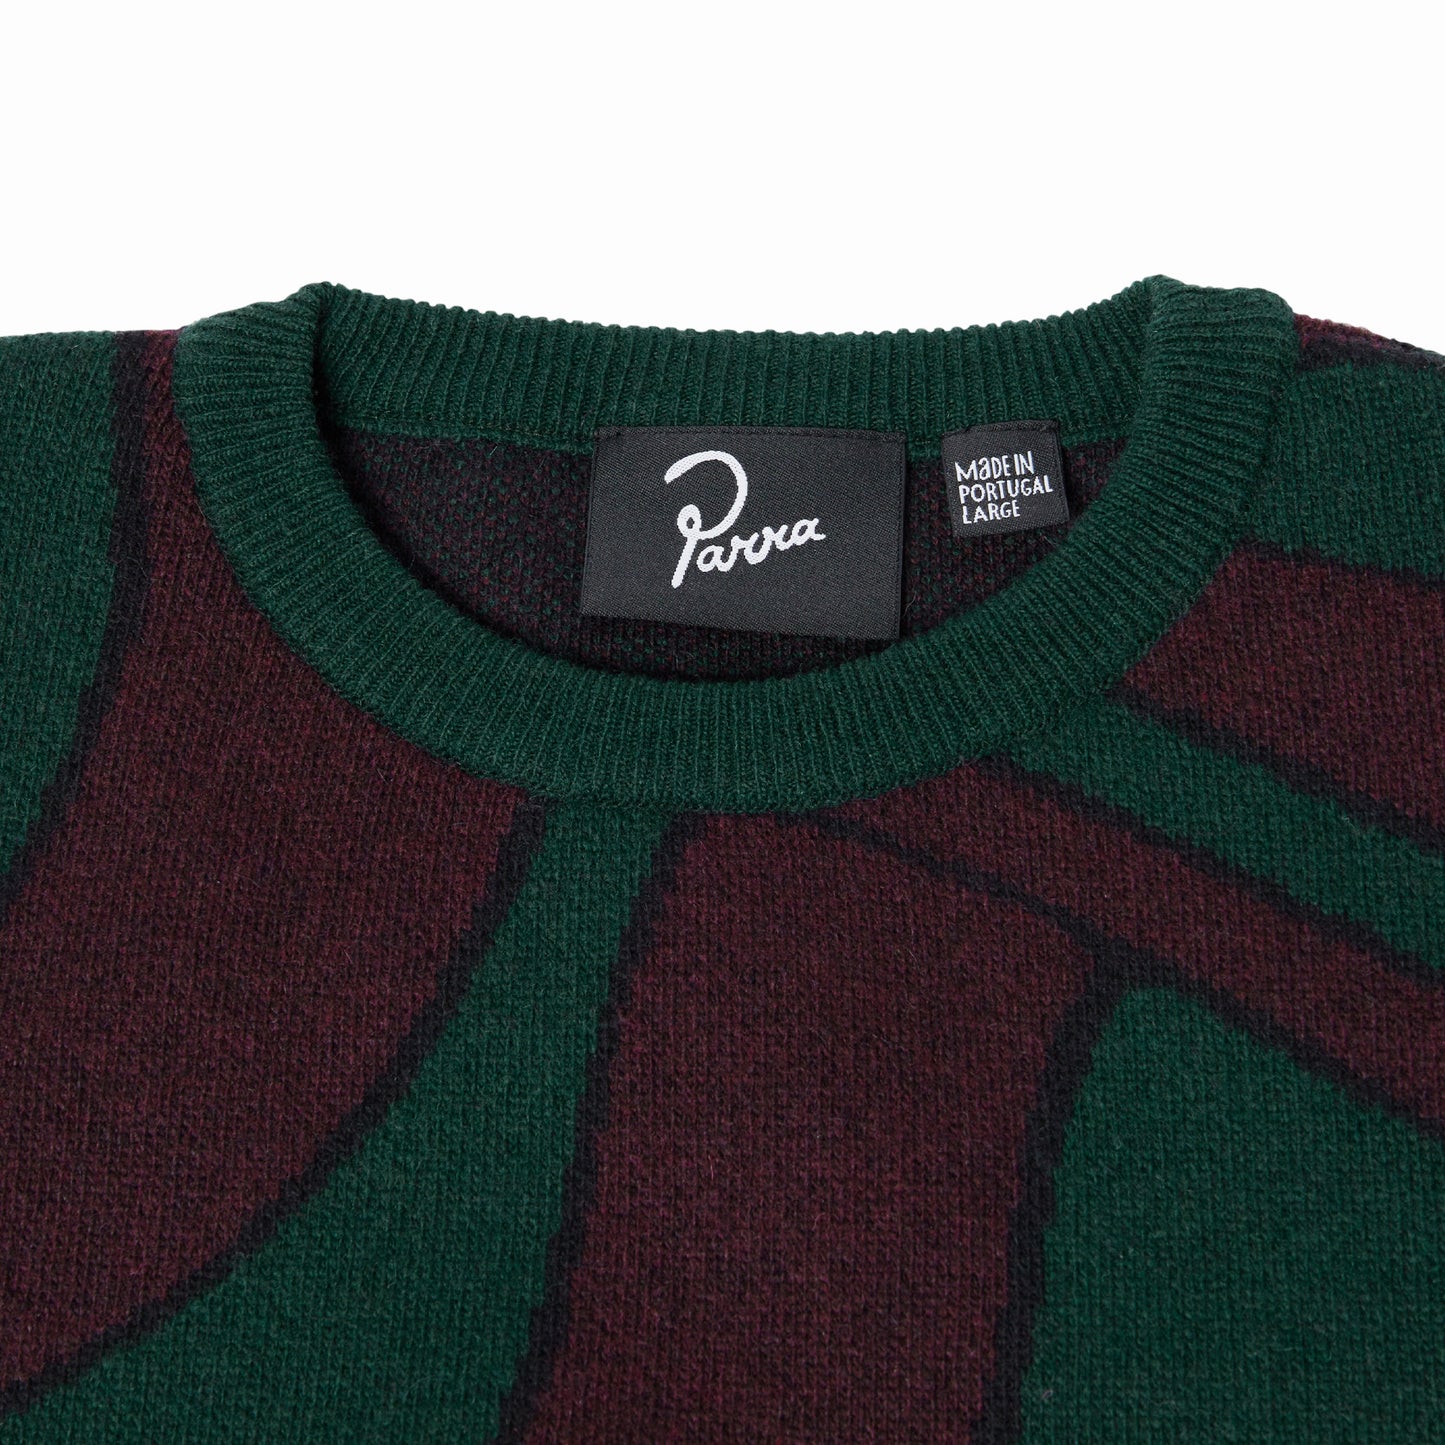 By Parra Distorted Waves Knitted Pullover